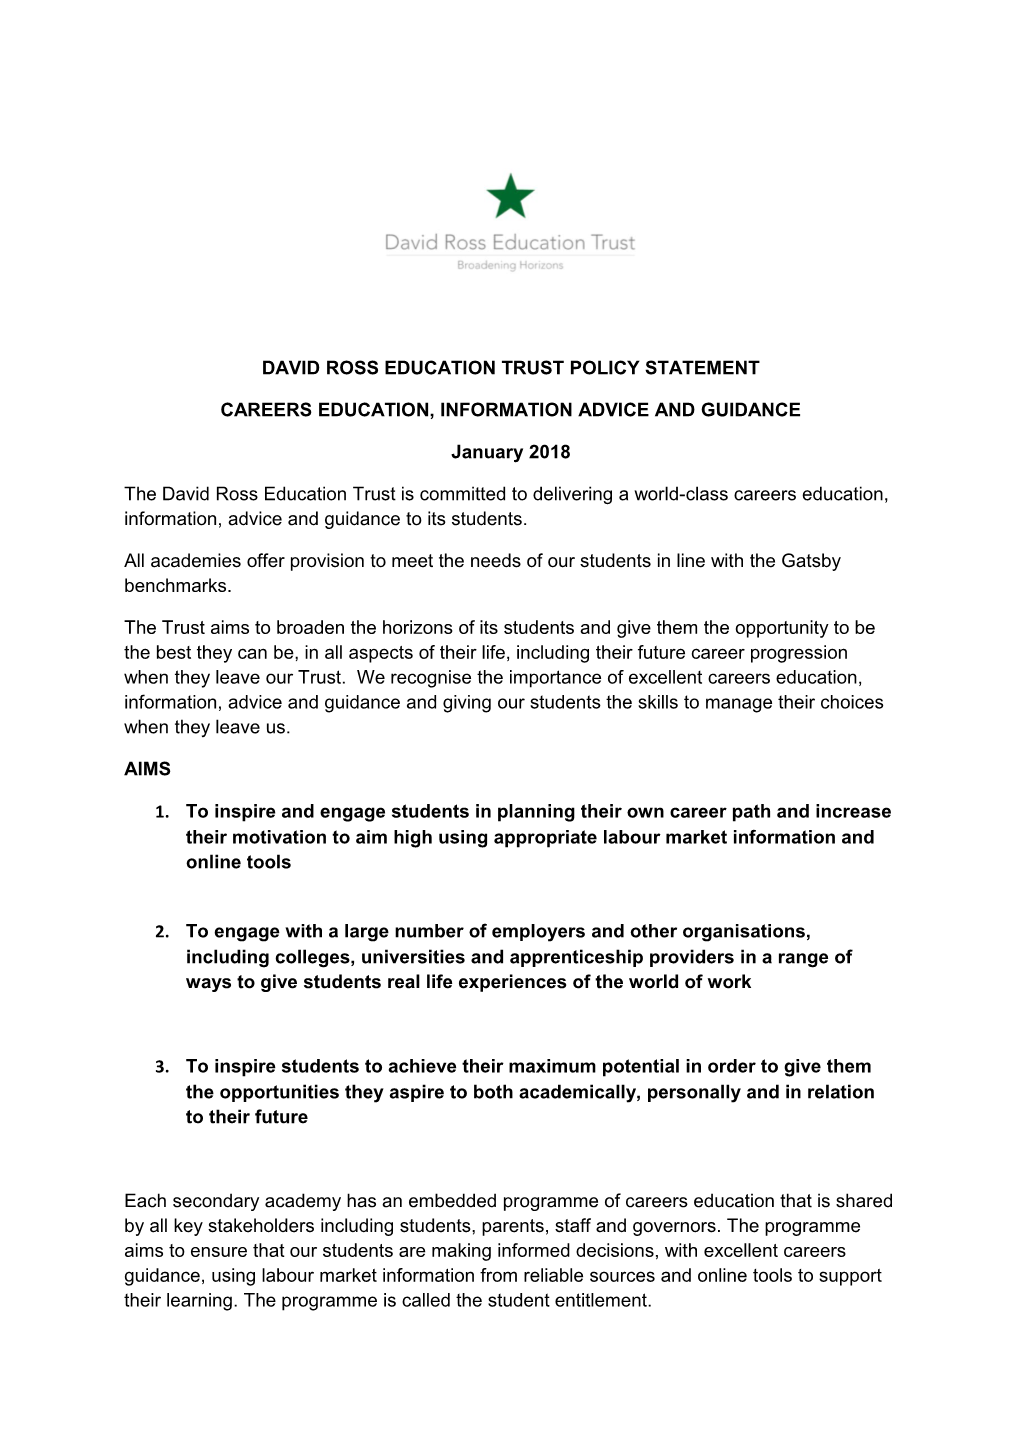 David Ross Education Trust Policy Statement